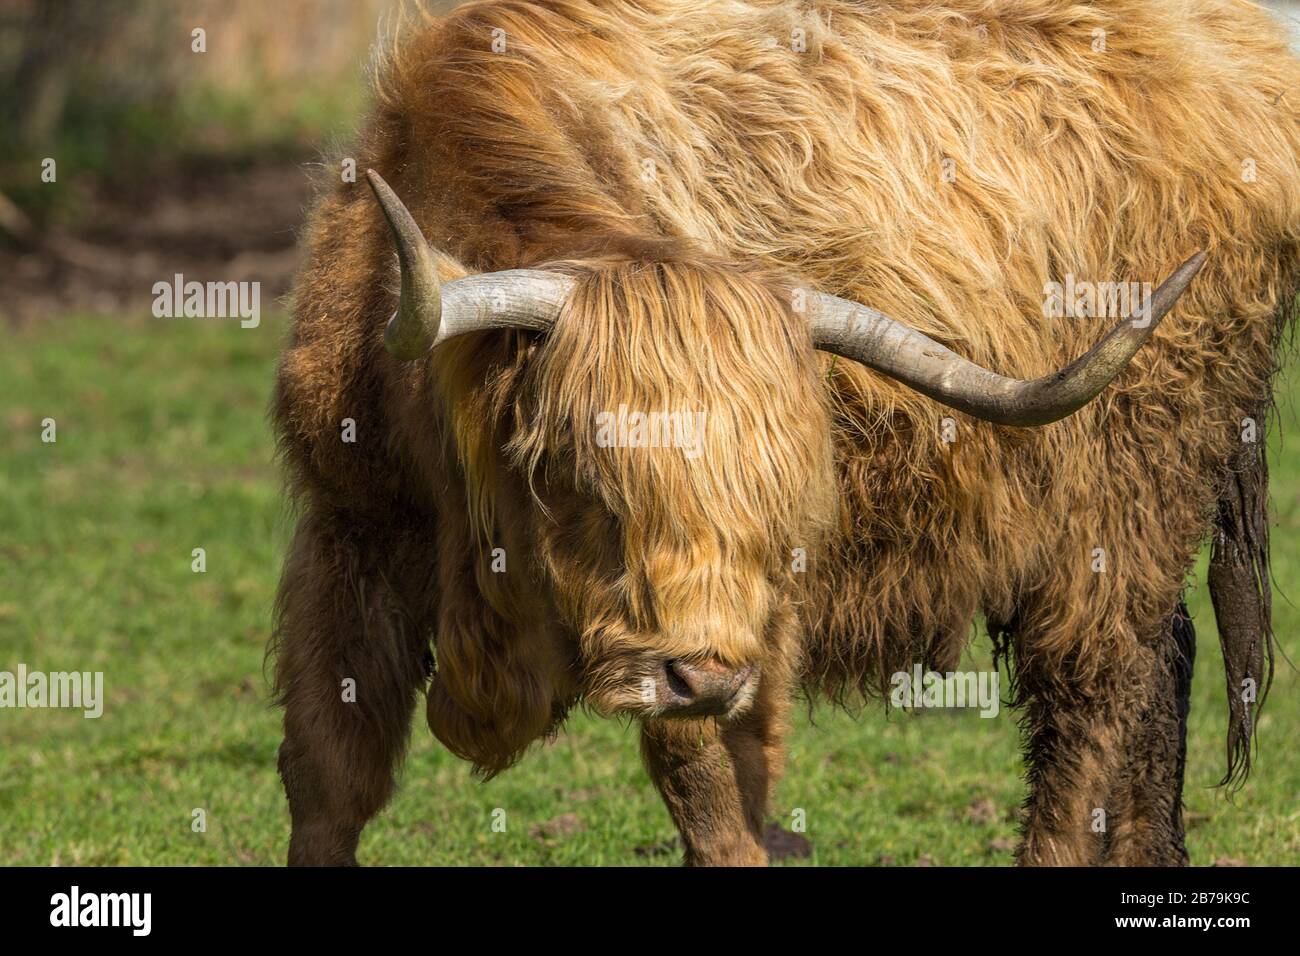 Long horned highland cattle red orange coat matted with mud as very wet winter weather 2020. Soaking up late winter sunshine on best remaining grass. Stock Photo